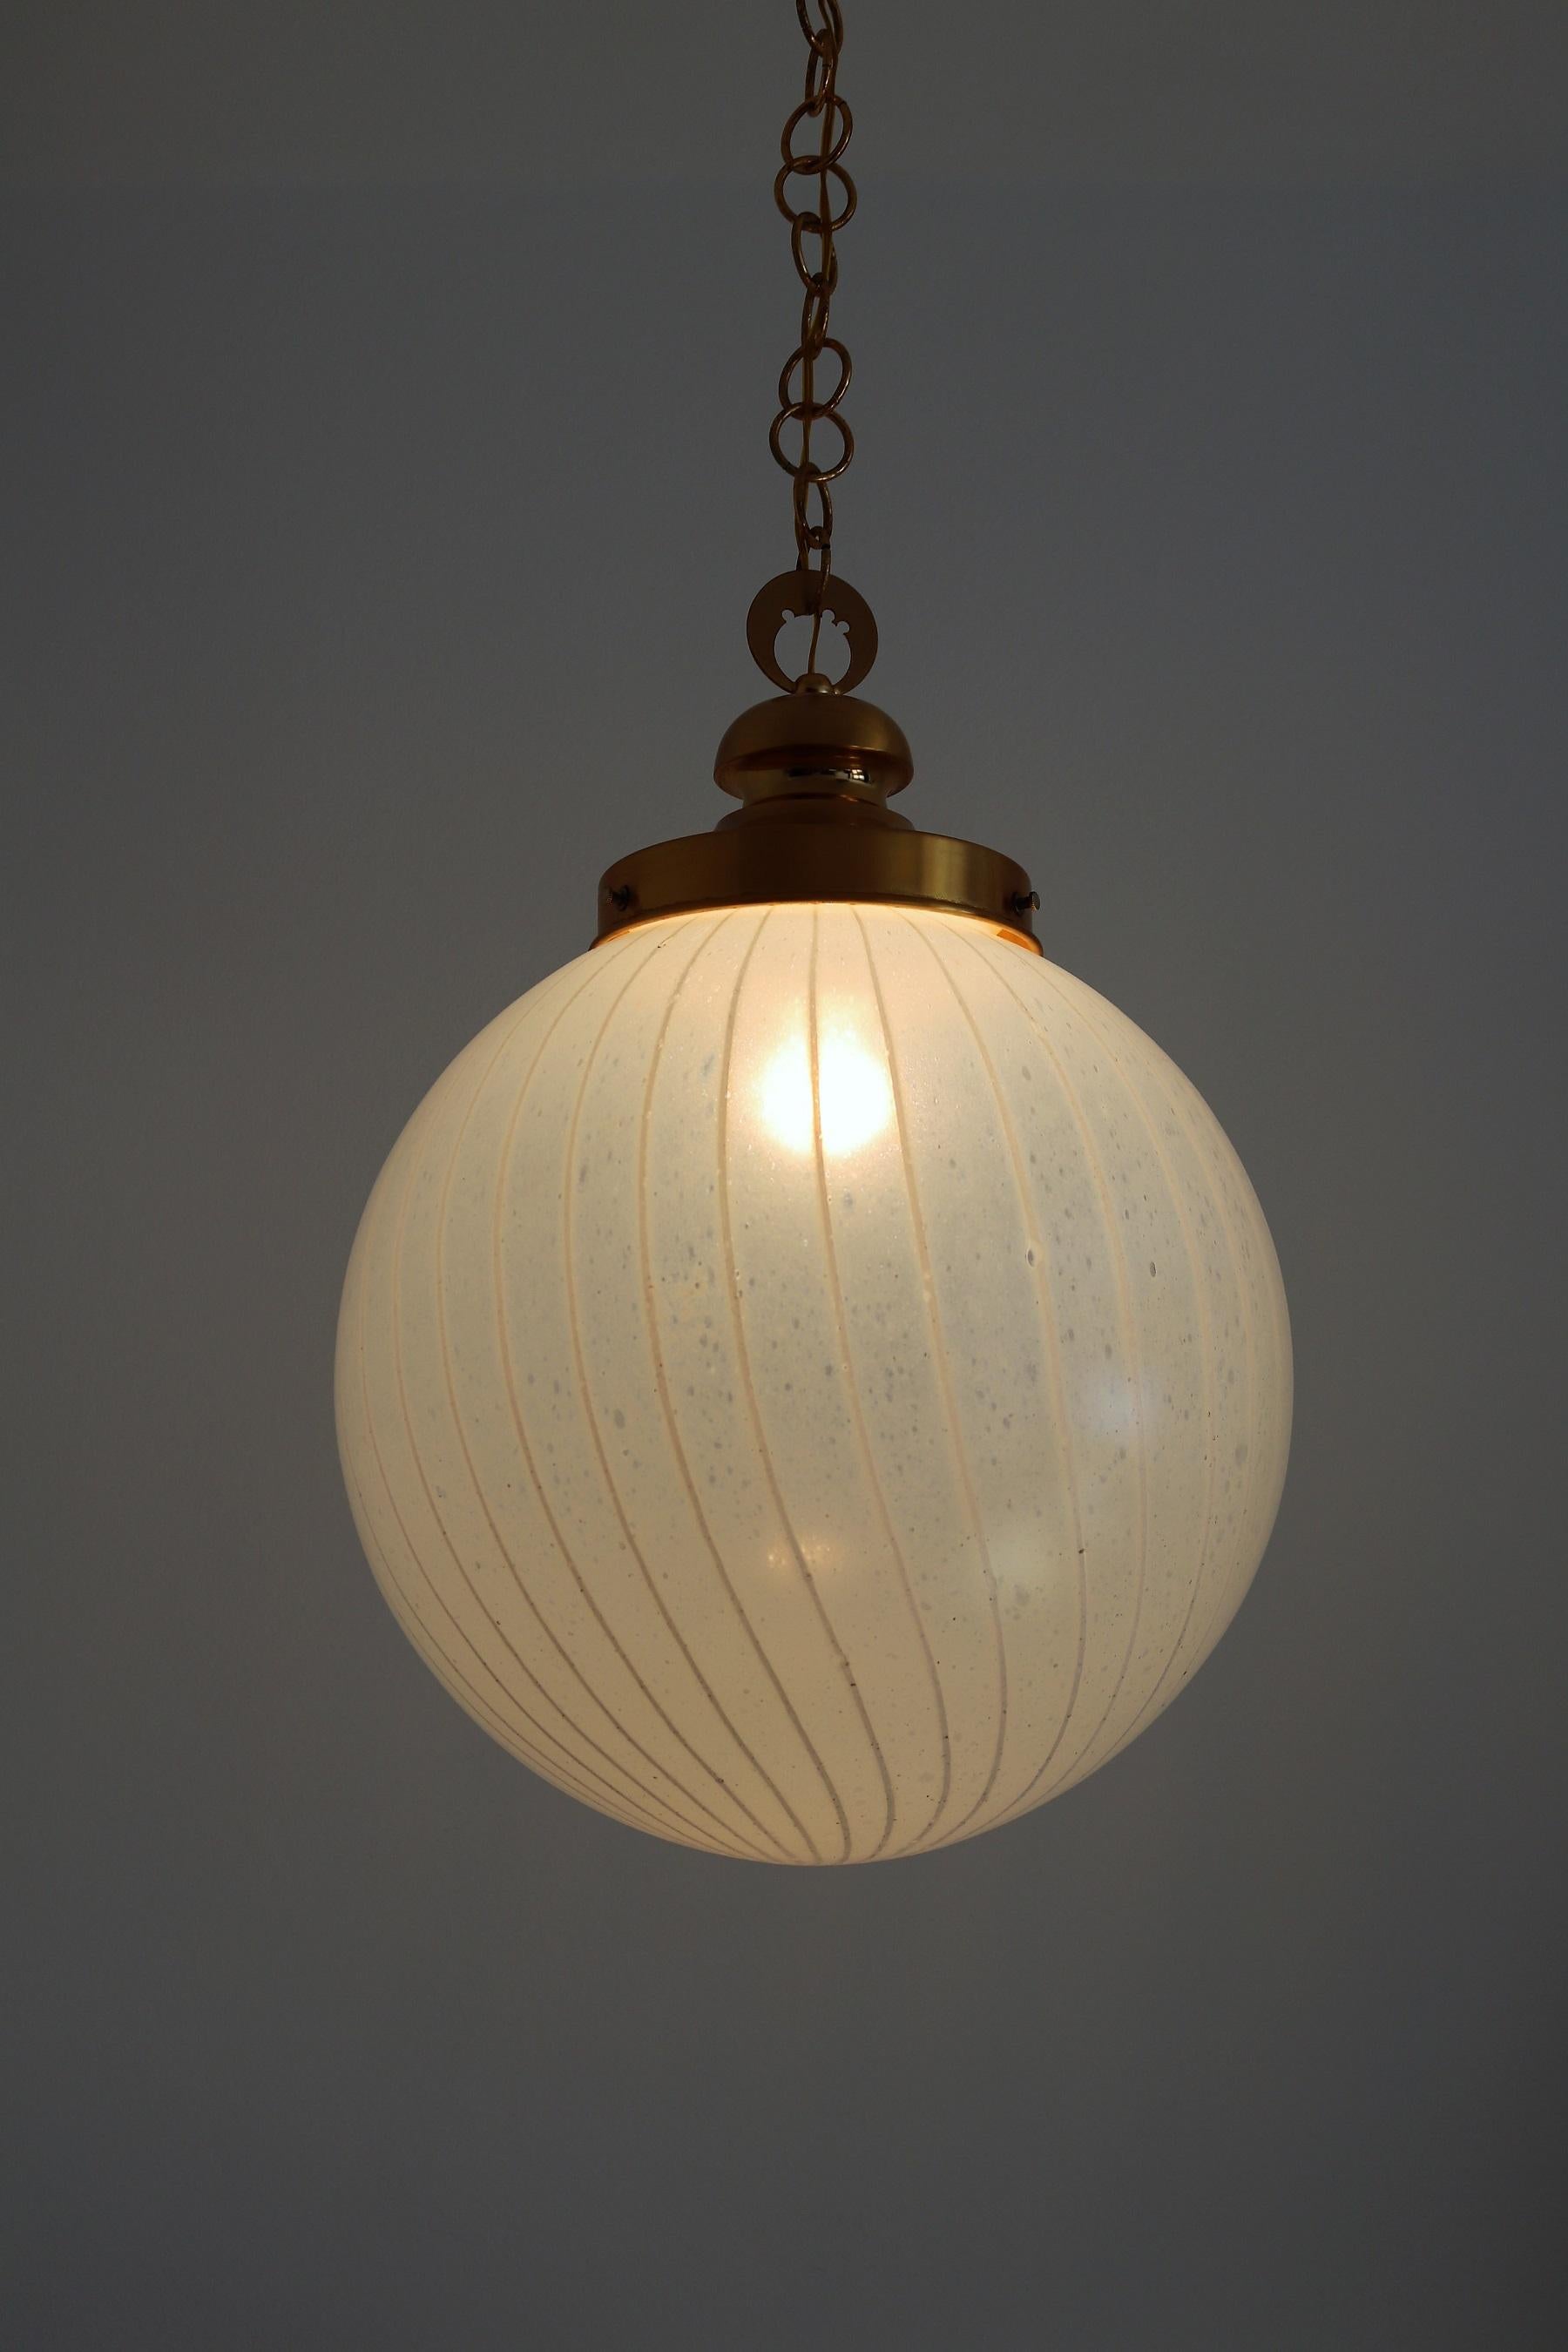 Italian Midcentury Murano Glass Globe Pendant Chandelier with Brass Details, 60s For Sale 7